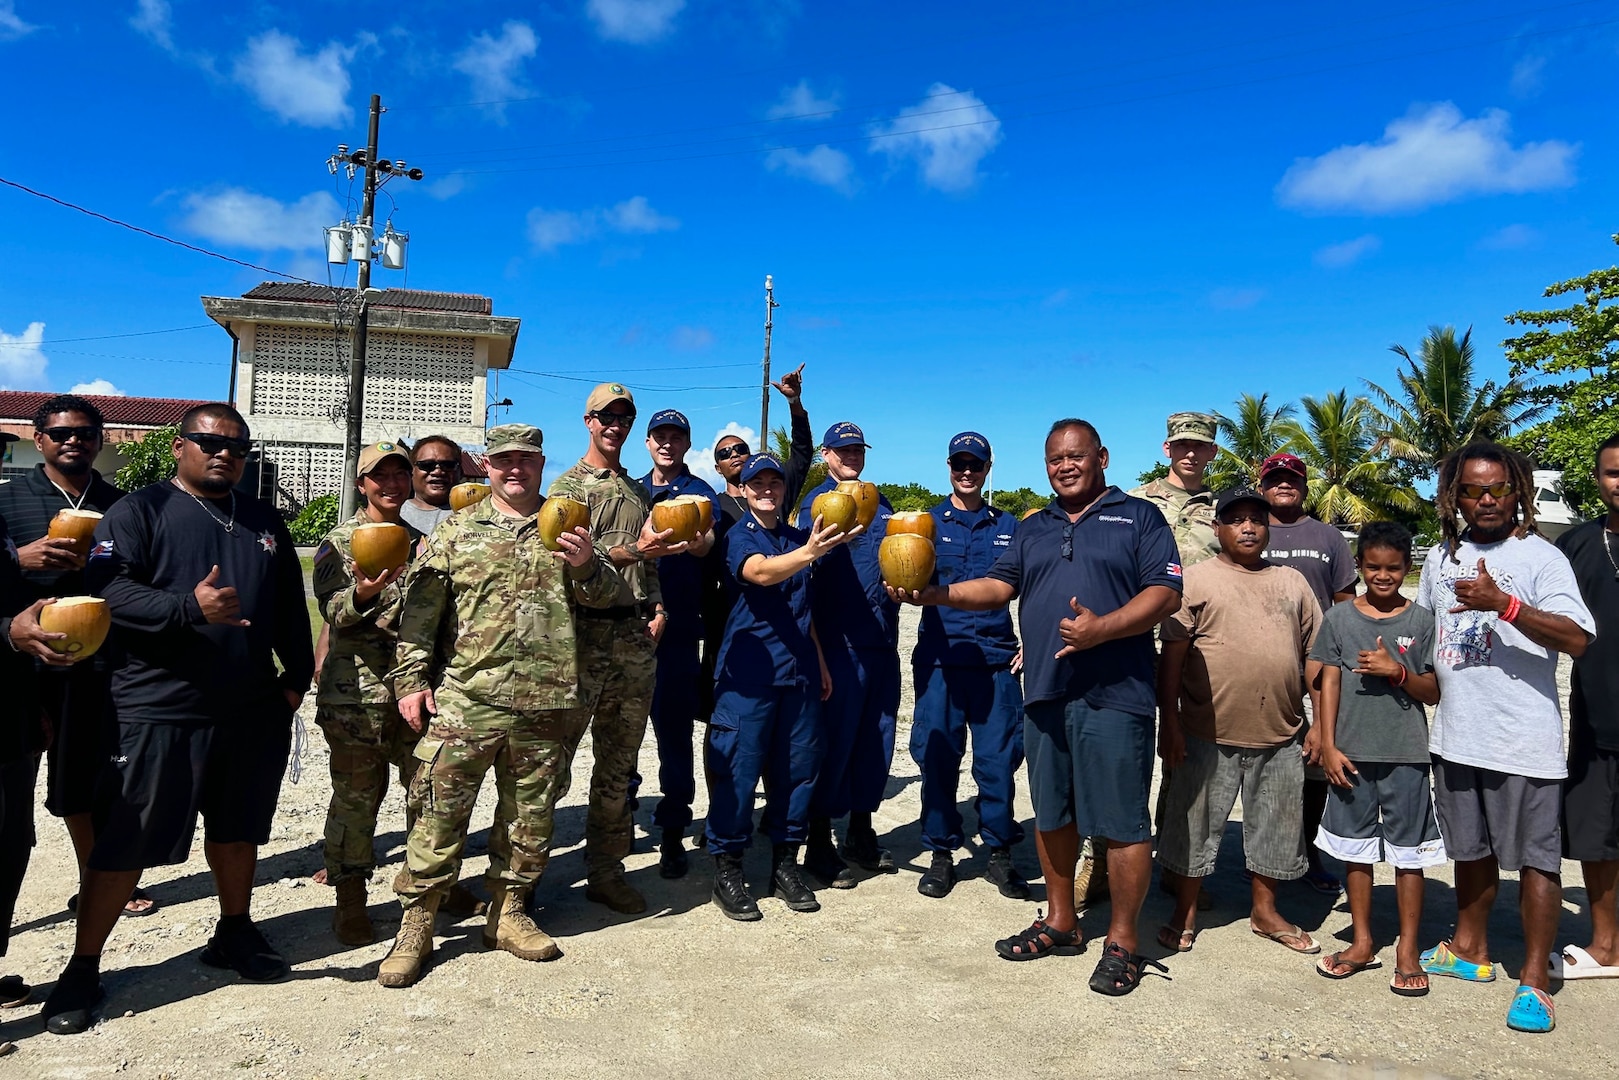 U.S. Coast Guard and U.S. Navy members stand for a photo with community members in the Republic of Palau following a boating safety class on Dec. 28, 2023. The U.S. Coast Guard regularly works with partners in the Republic of Palau; this series of events was part of Pacific Partnership 2024, which is now, in its 19th iteration, the largest multinational humanitarian assistance and disaster relief preparedness mission conducted in the region. (U.S. Coast Guard photo)